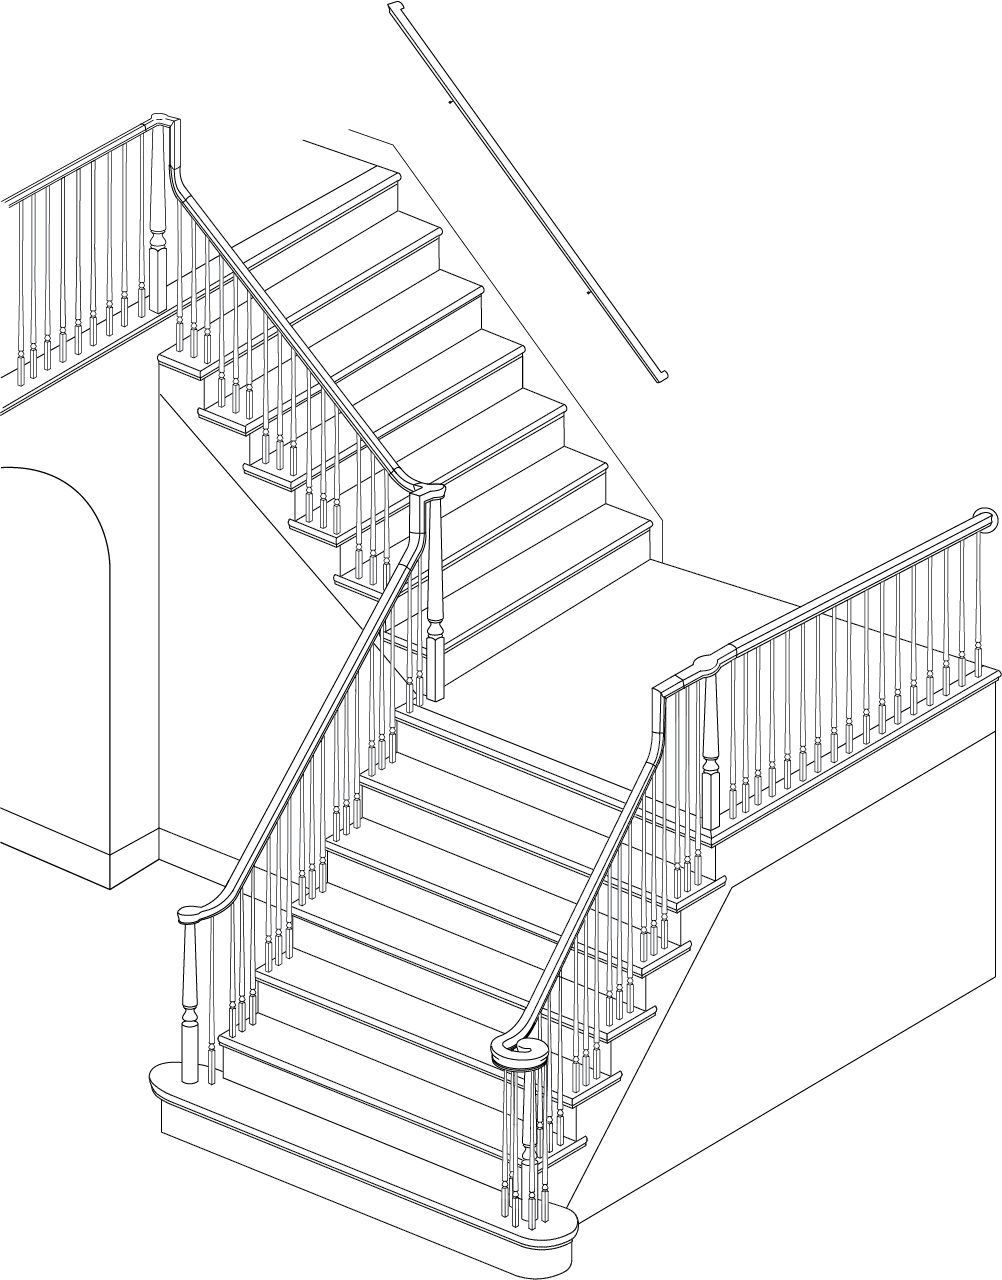 Parts and Components of a staircase